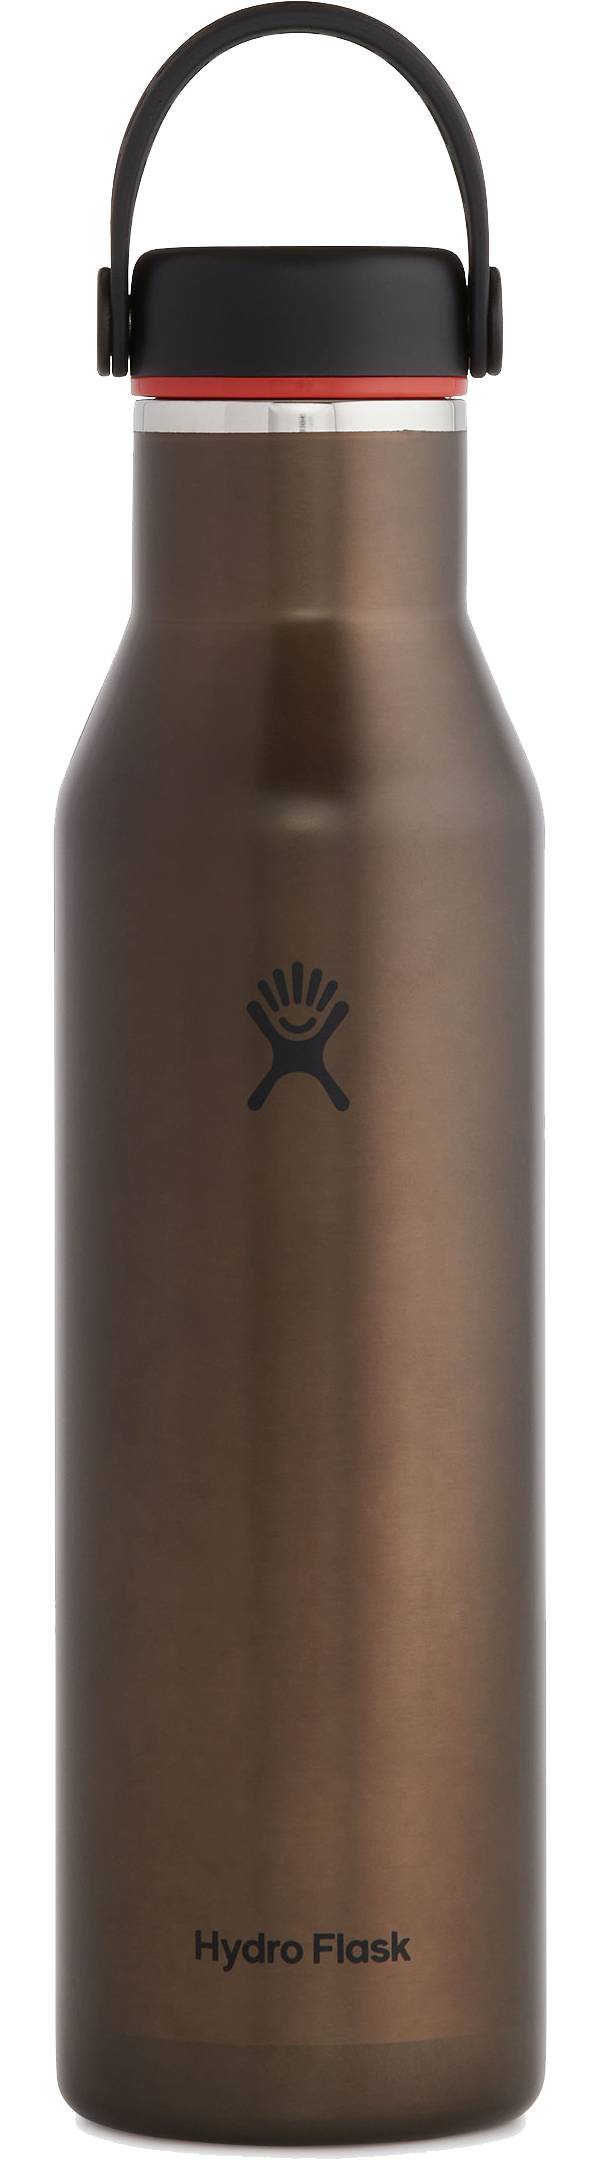 Hydro Flask 21 oz. Lightweight Standard Mouth Trail Series Bottle product image